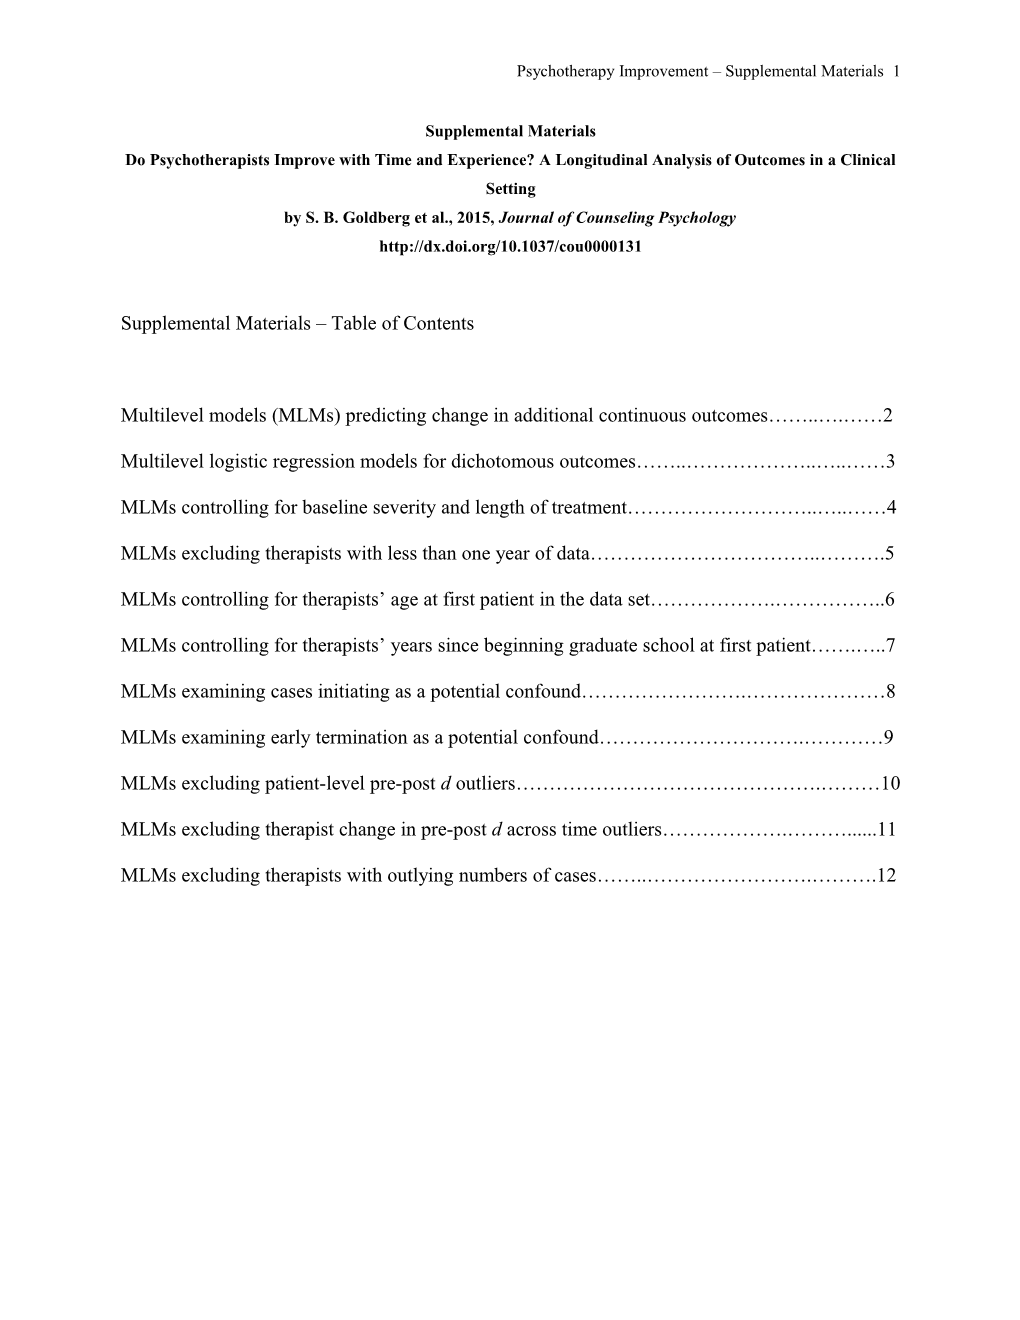 Supplemental Materials Table of Contents